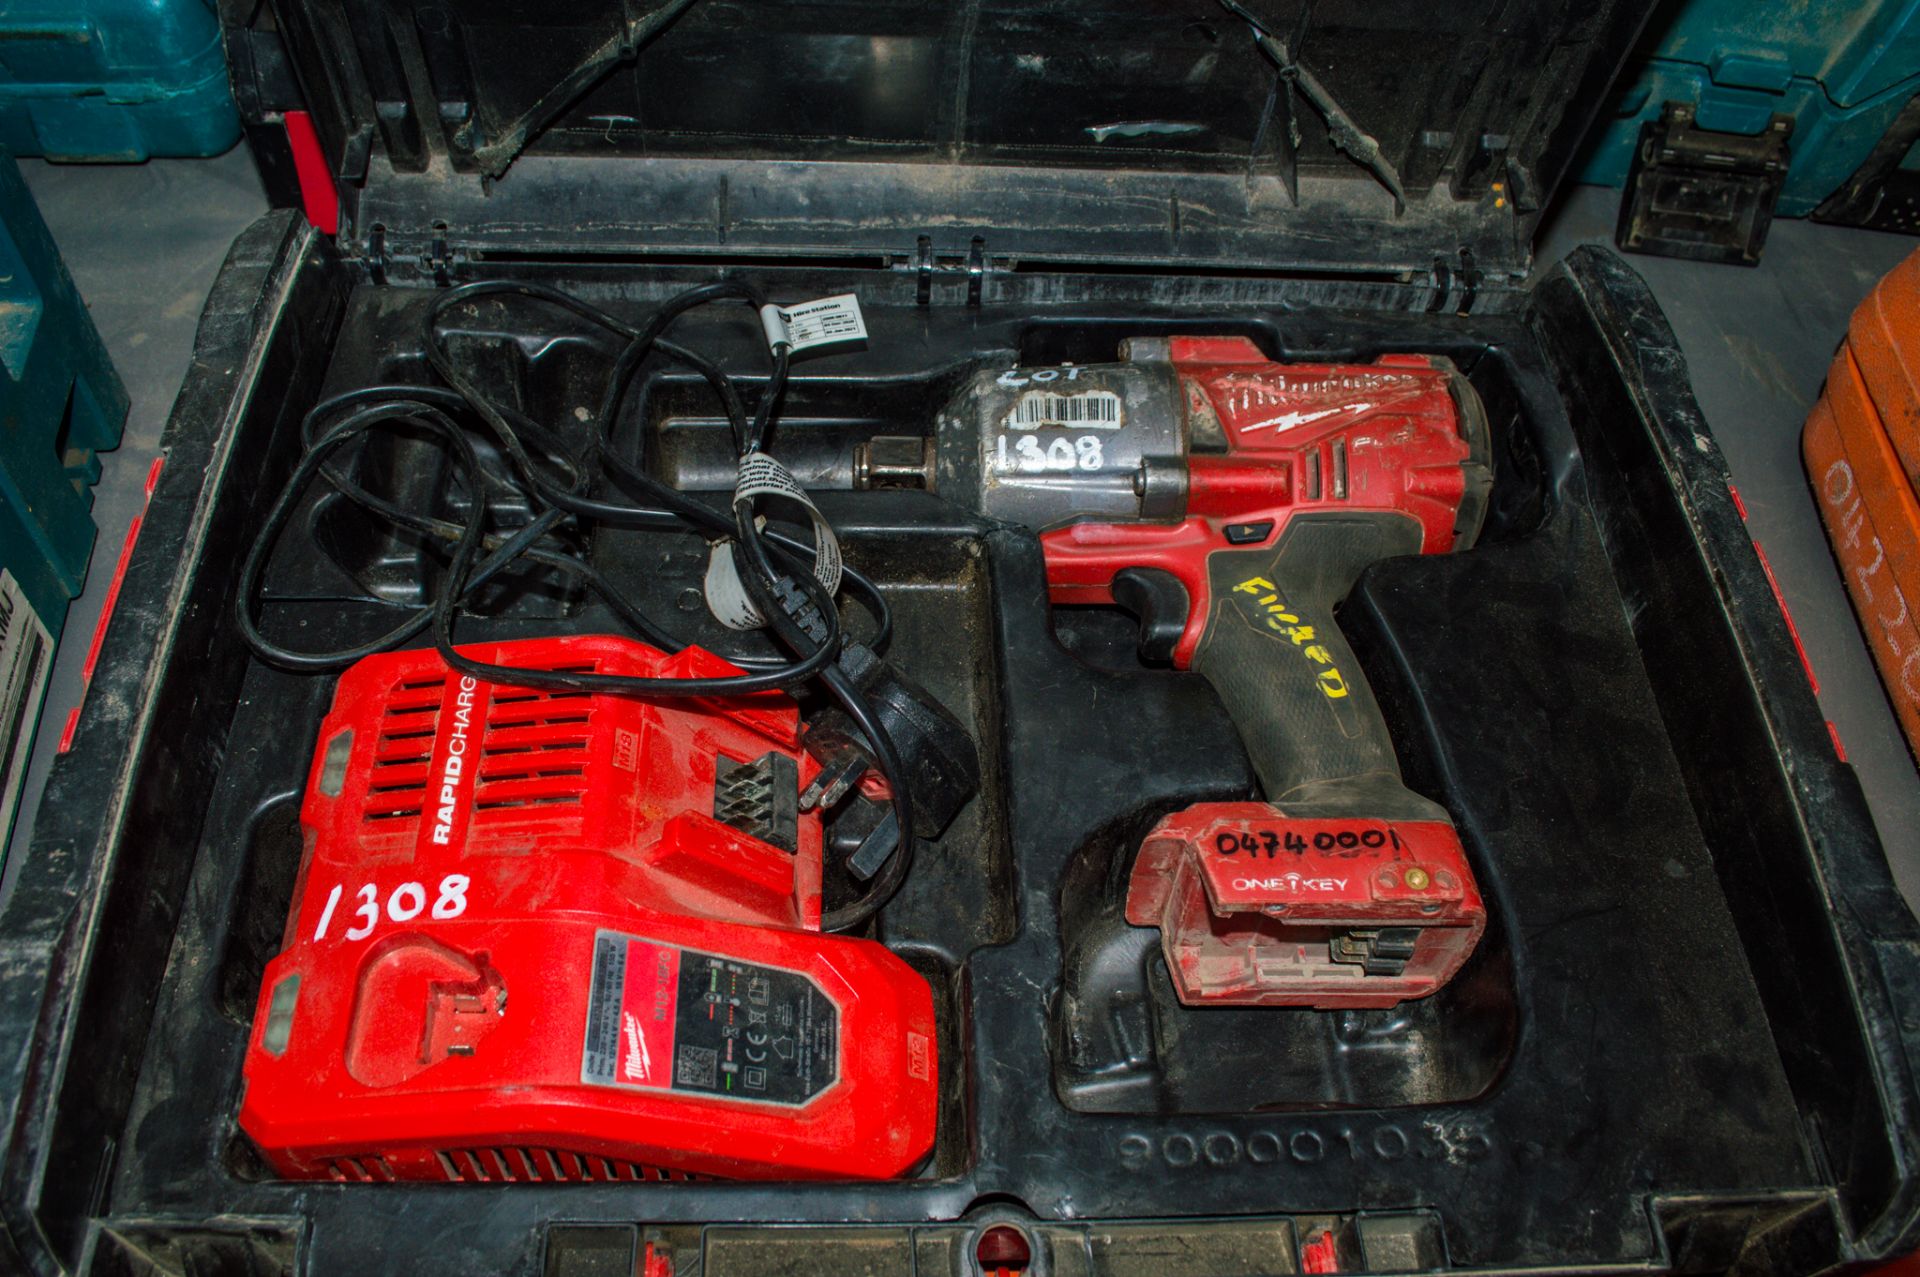 Milwaukee 18v cordless 3/4 inch drive impact gun c/w charger & carry case 04740001 ** No battery **